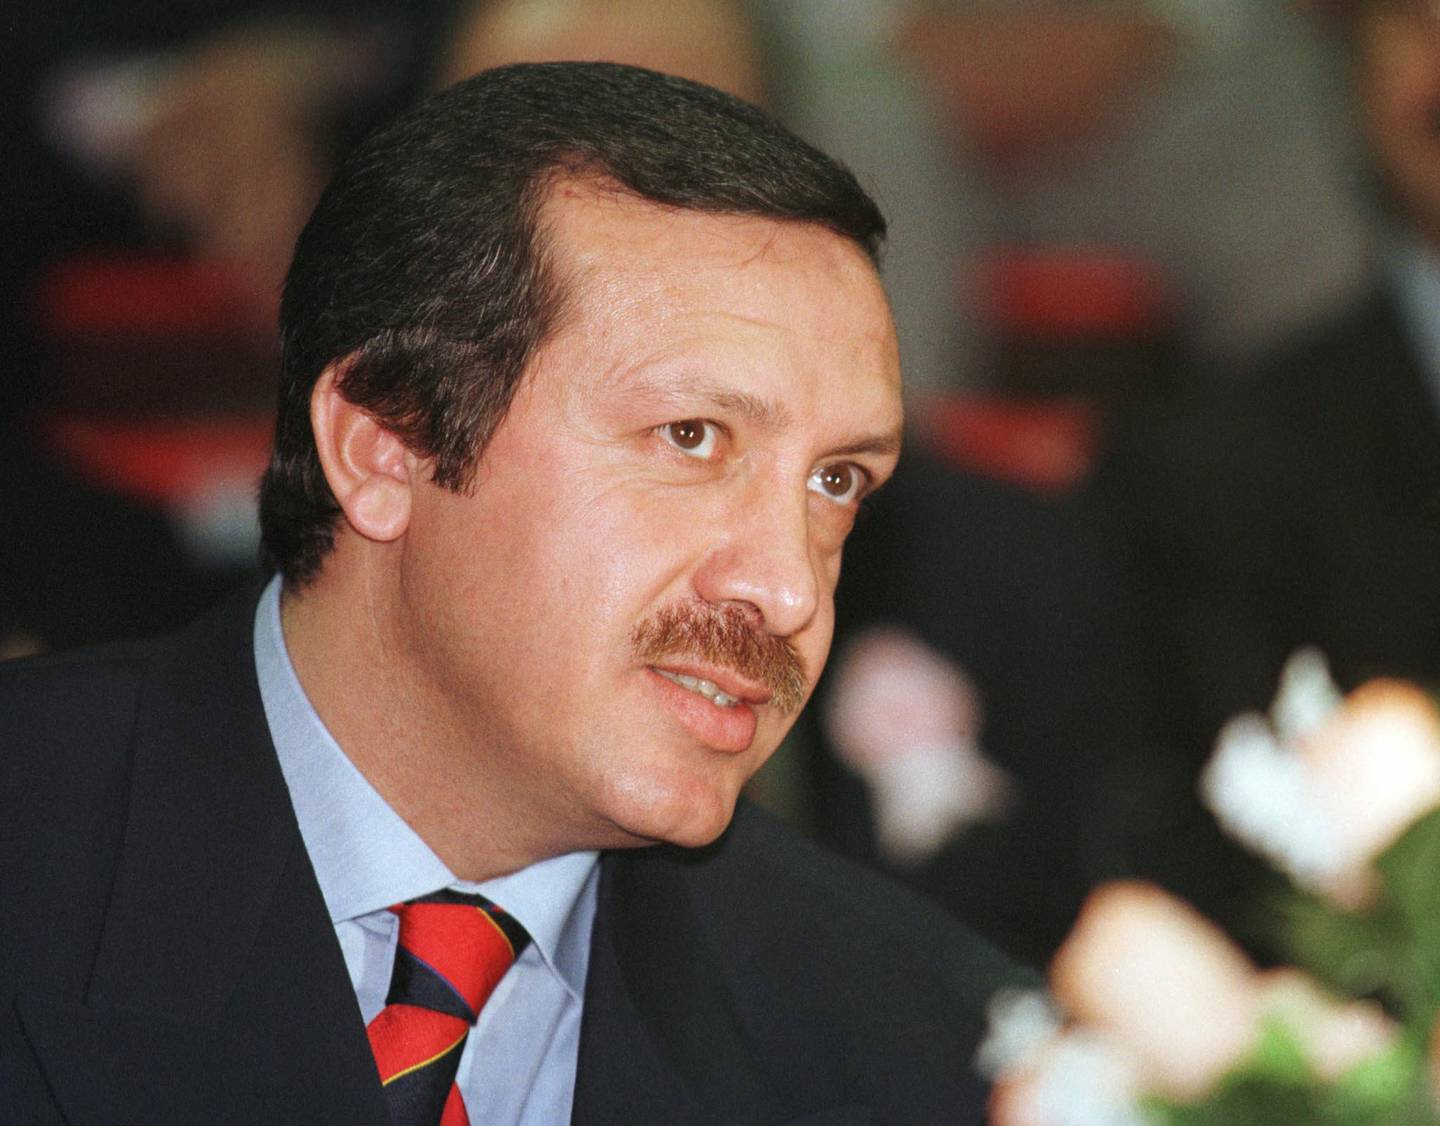 FILE - Istanbul Mayor Recep Tayyip Erdogan during the outlawed Islamic Welfare Party's provincial congress in Istanbul, Sunday, December 21, 1997. In a blow to the Islamic movement, a court in southeastern Diyarbakir city sentenced Erdogan, seen as the Islamic movement's up and coming leader, to 10 months in prison for inciting hatred based on religious differences.(AP Photo/Murad Sezer/File)